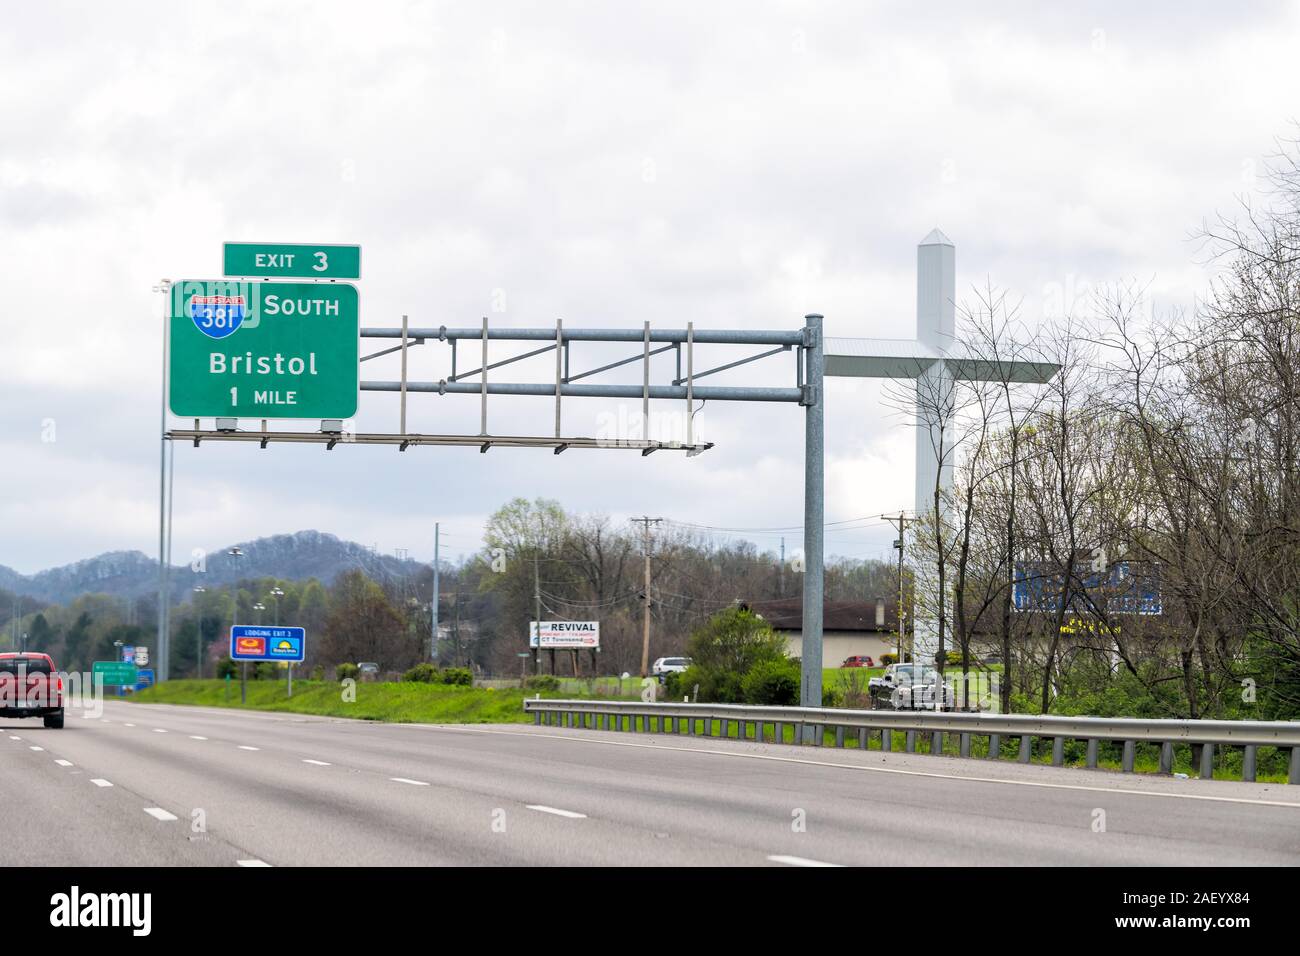 Bristol, USA - April 19, 2018: Small town exit sign in Virginia on interstate 381 or 81 with big large cross by church and traffic cars Stock Photo